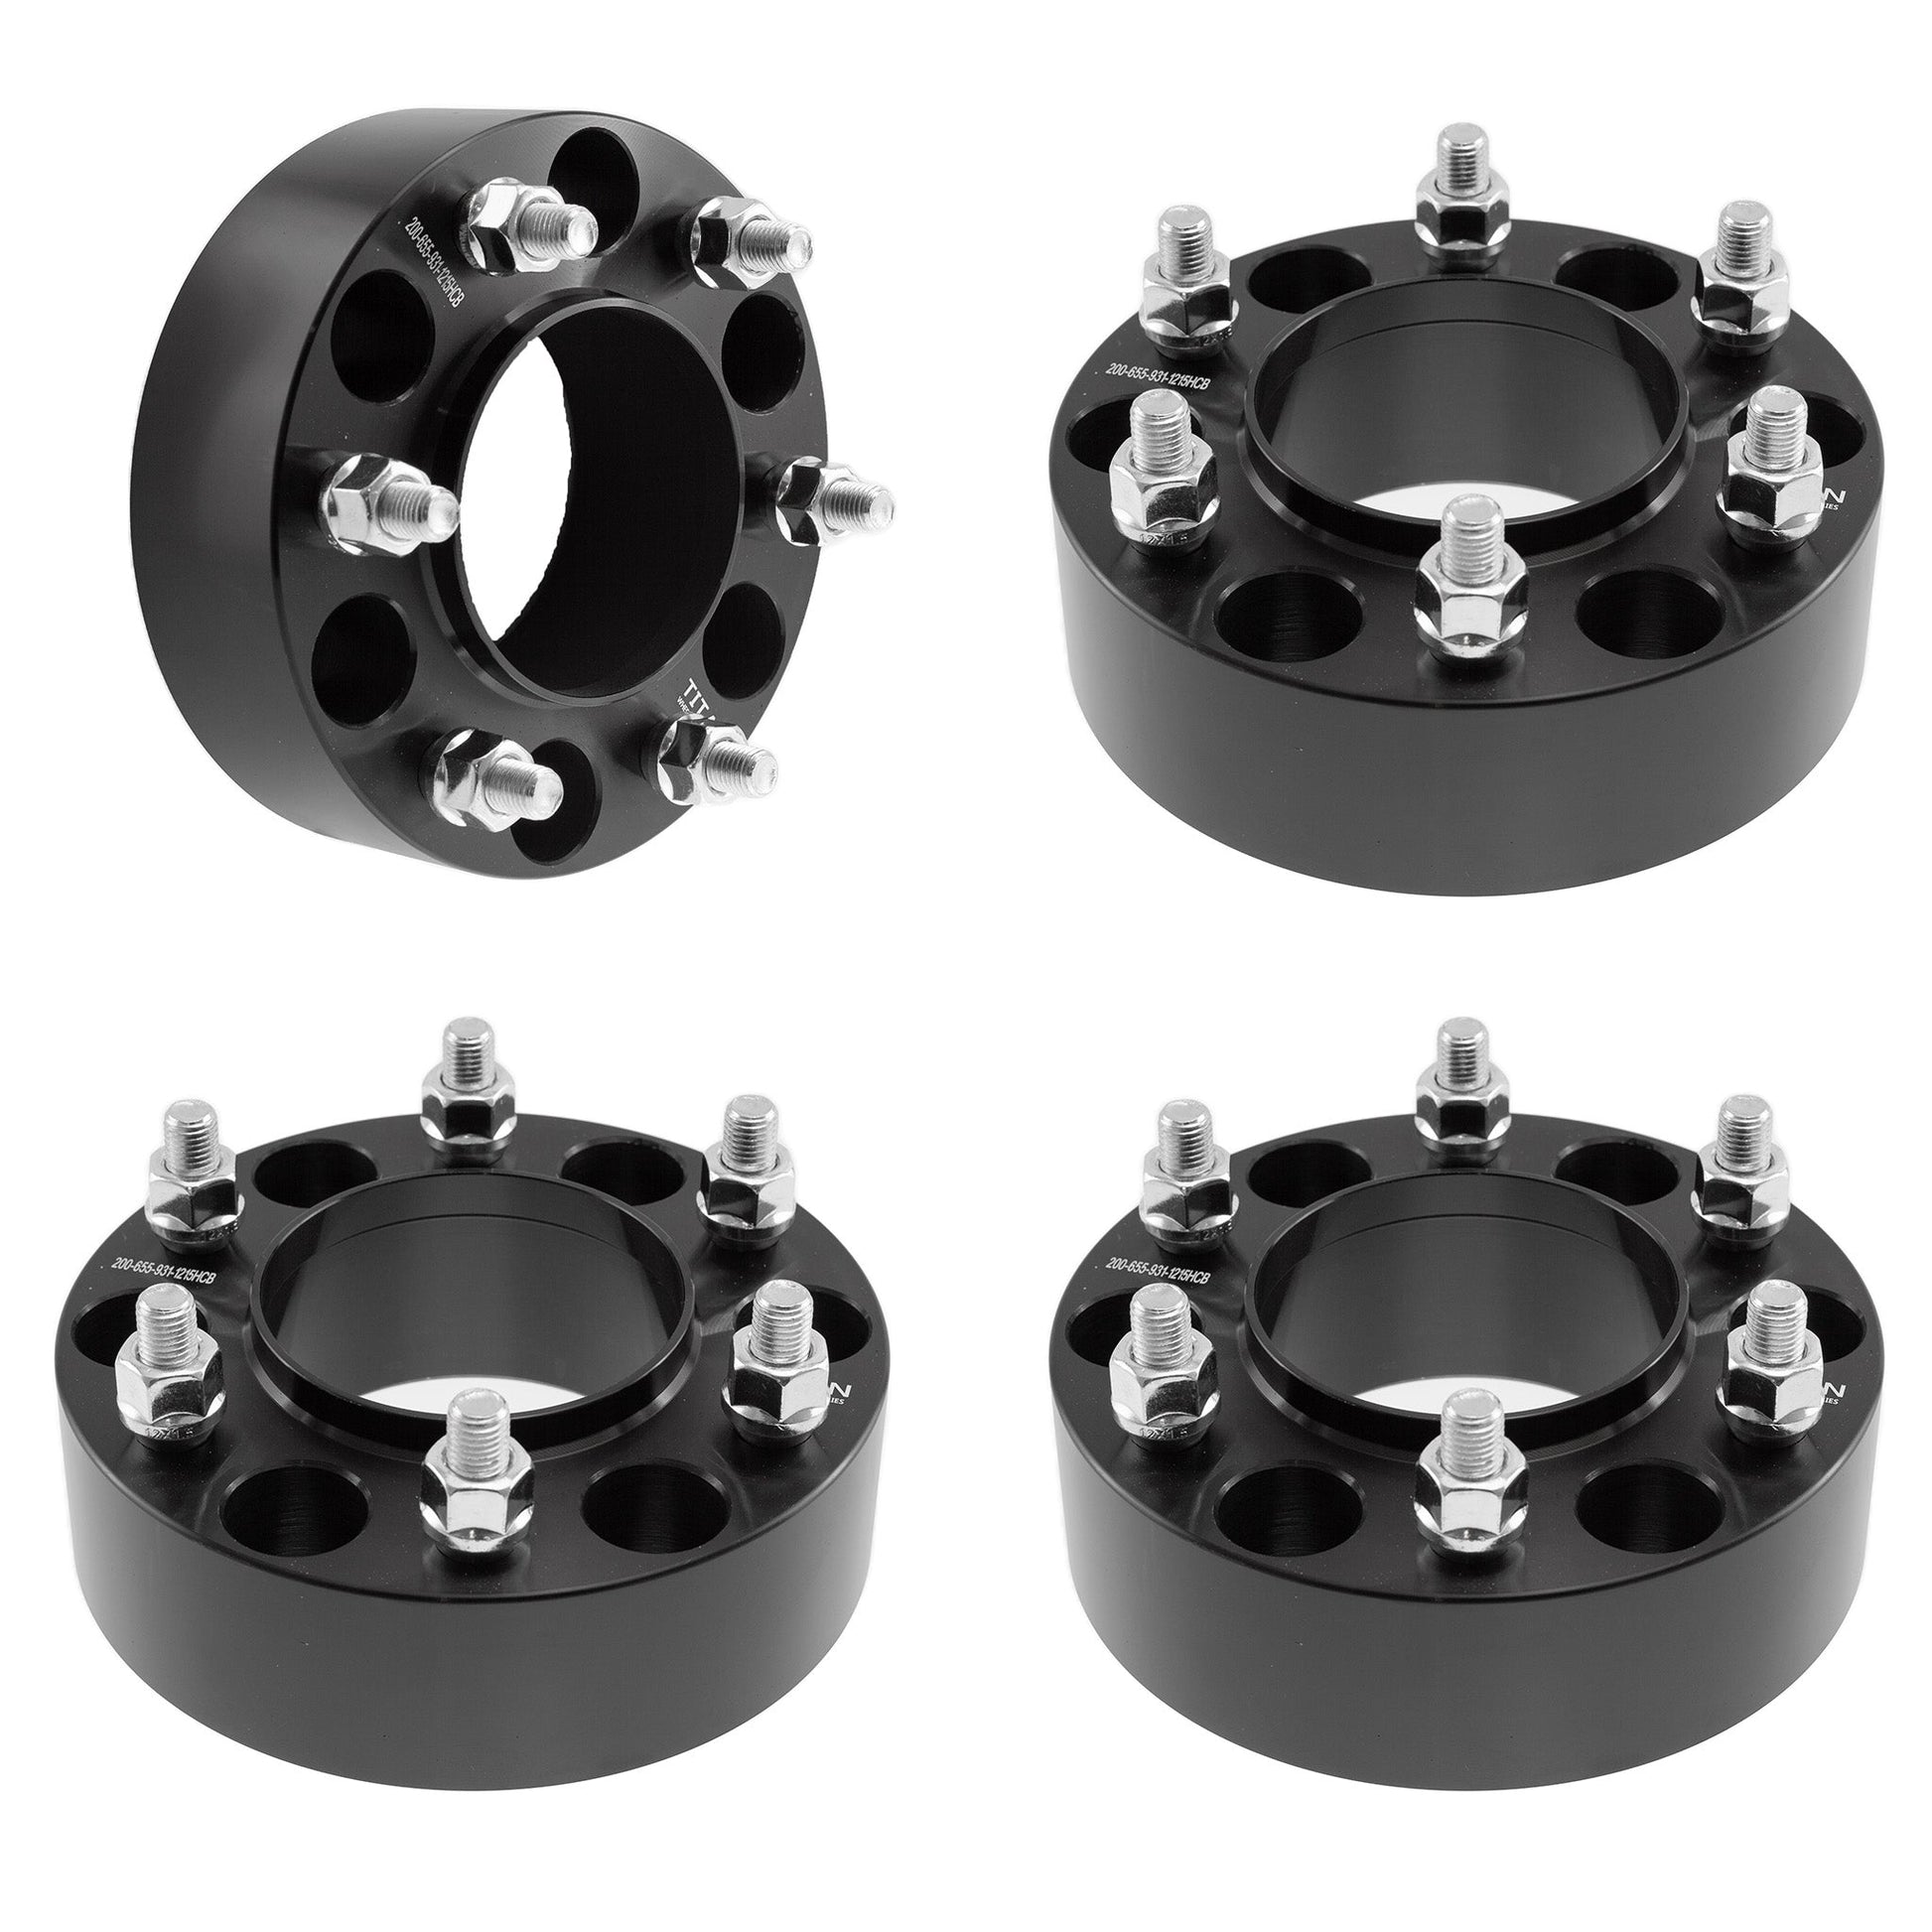 2" (50mm) Titan Wheel Spacers for Ford Bronco 2021-2022 Ranger 2019+ | 6x5.5 (6x139.7) | 93.1 Hubcentric | 12x1.5 Studs | Set of 4 | Titan Wheel Accessories